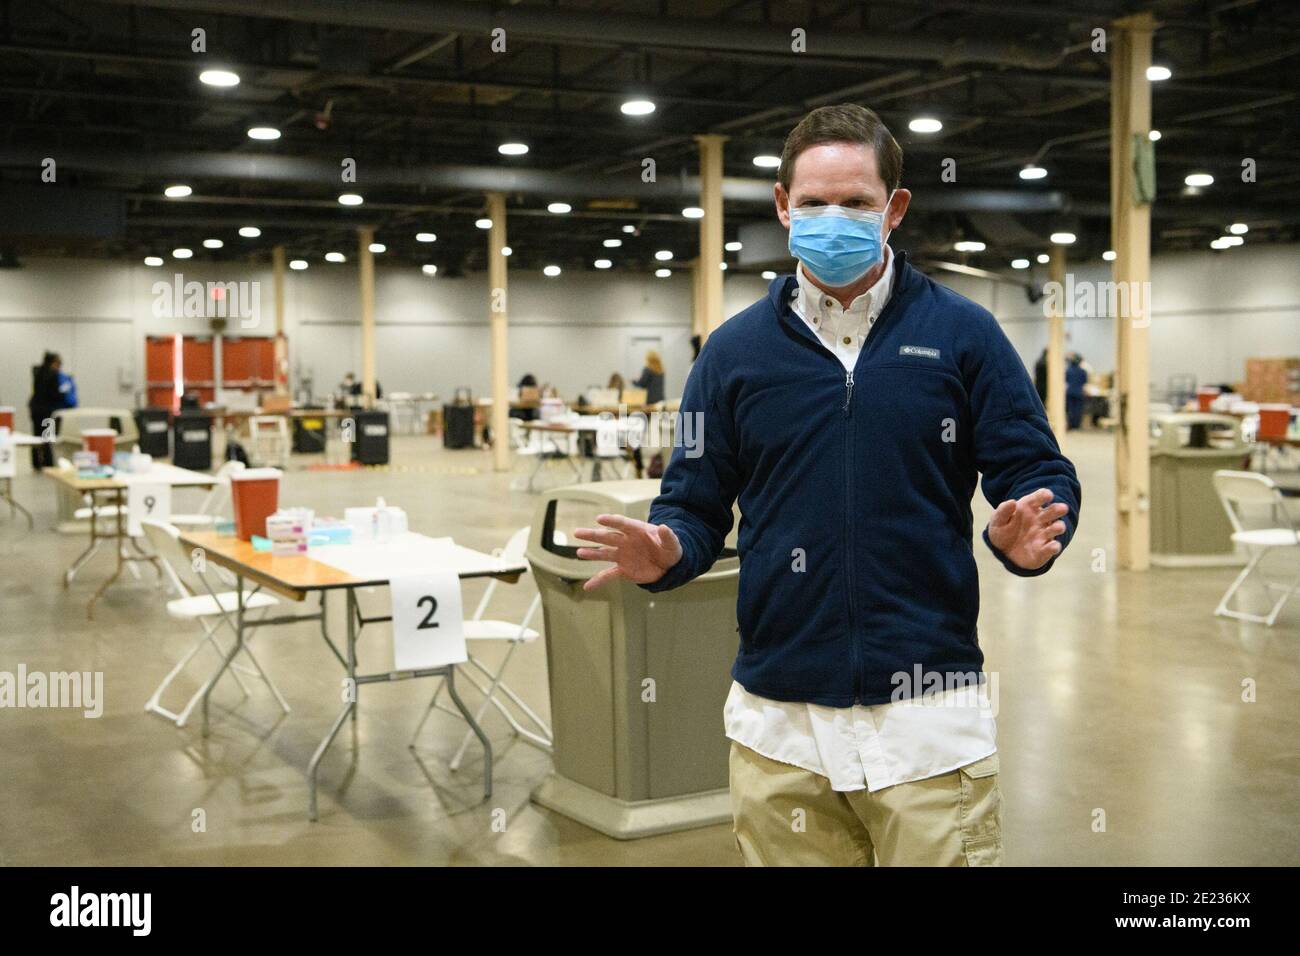 Dallas, Texas, USA. 11th Jan, 2021. Dallas County TX Judge Clay Jenkins provides a walk-through of the mega-vaccination center process at the Dallas County COVID Mega-Vaccination Center in Fair Park, Dallas. He is standing near the tables where the vaccine will be administered to residents.The site is a joint effort between the city and county, will vaccinate up to 2,000 people a day, depending upon supply. The site opened as Texas shifts from smaller distribution sites to 'hubs'' that can vaccinate thousands a day. Credit: Avi Adelman/ZUMA Wire/Alamy Live News Stock Photo